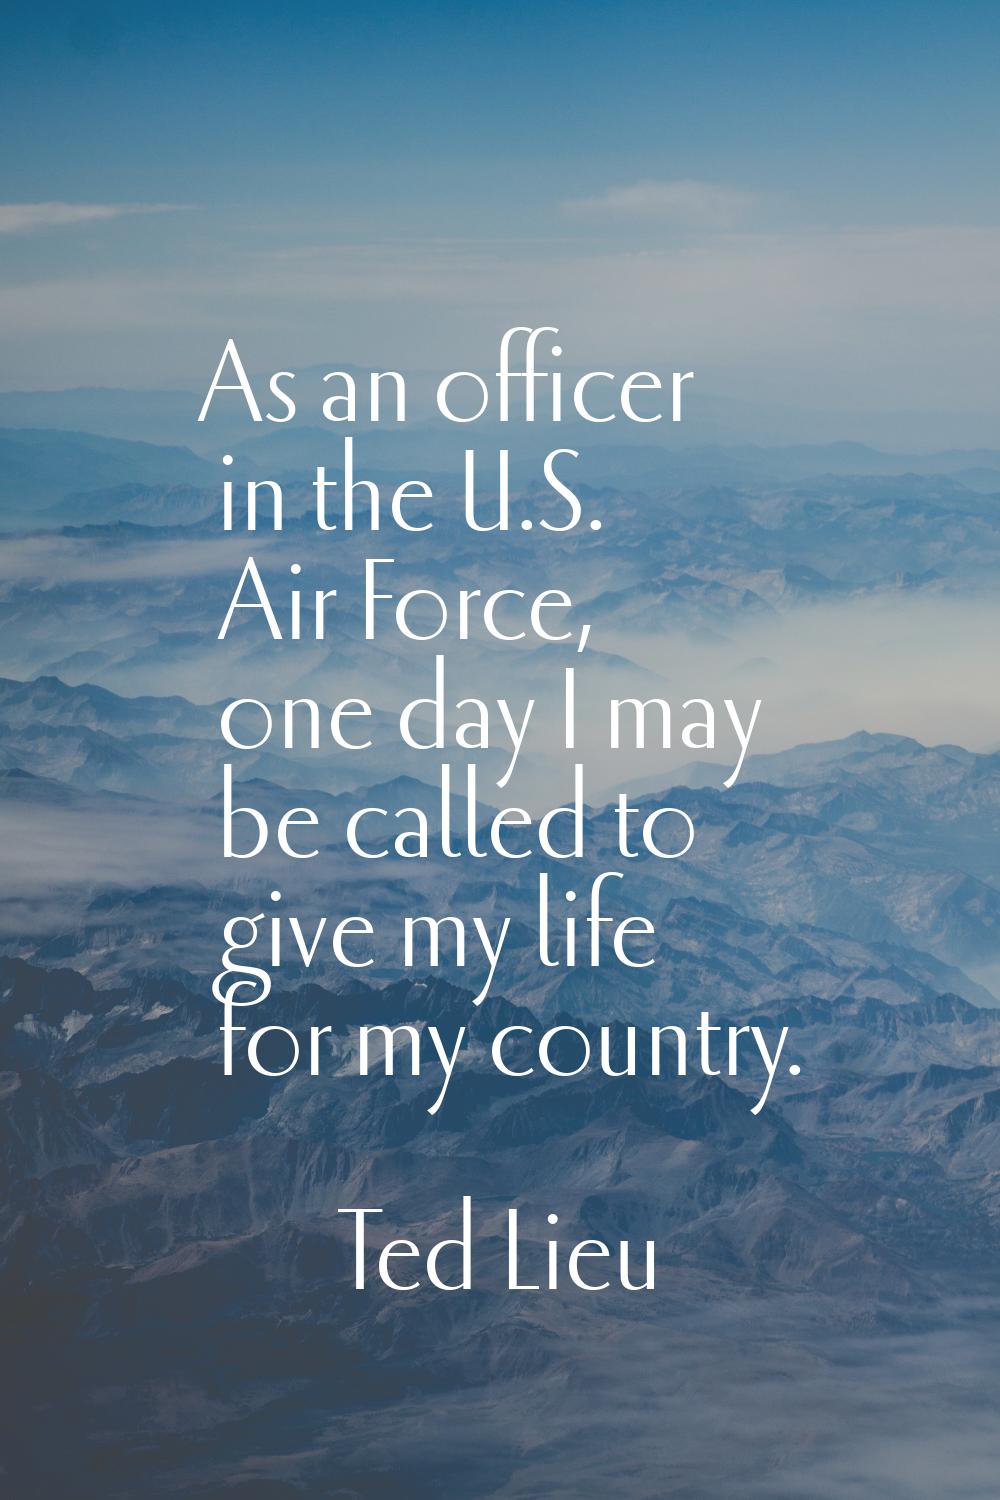 As an officer in the U.S. Air Force, one day I may be called to give my life for my country.